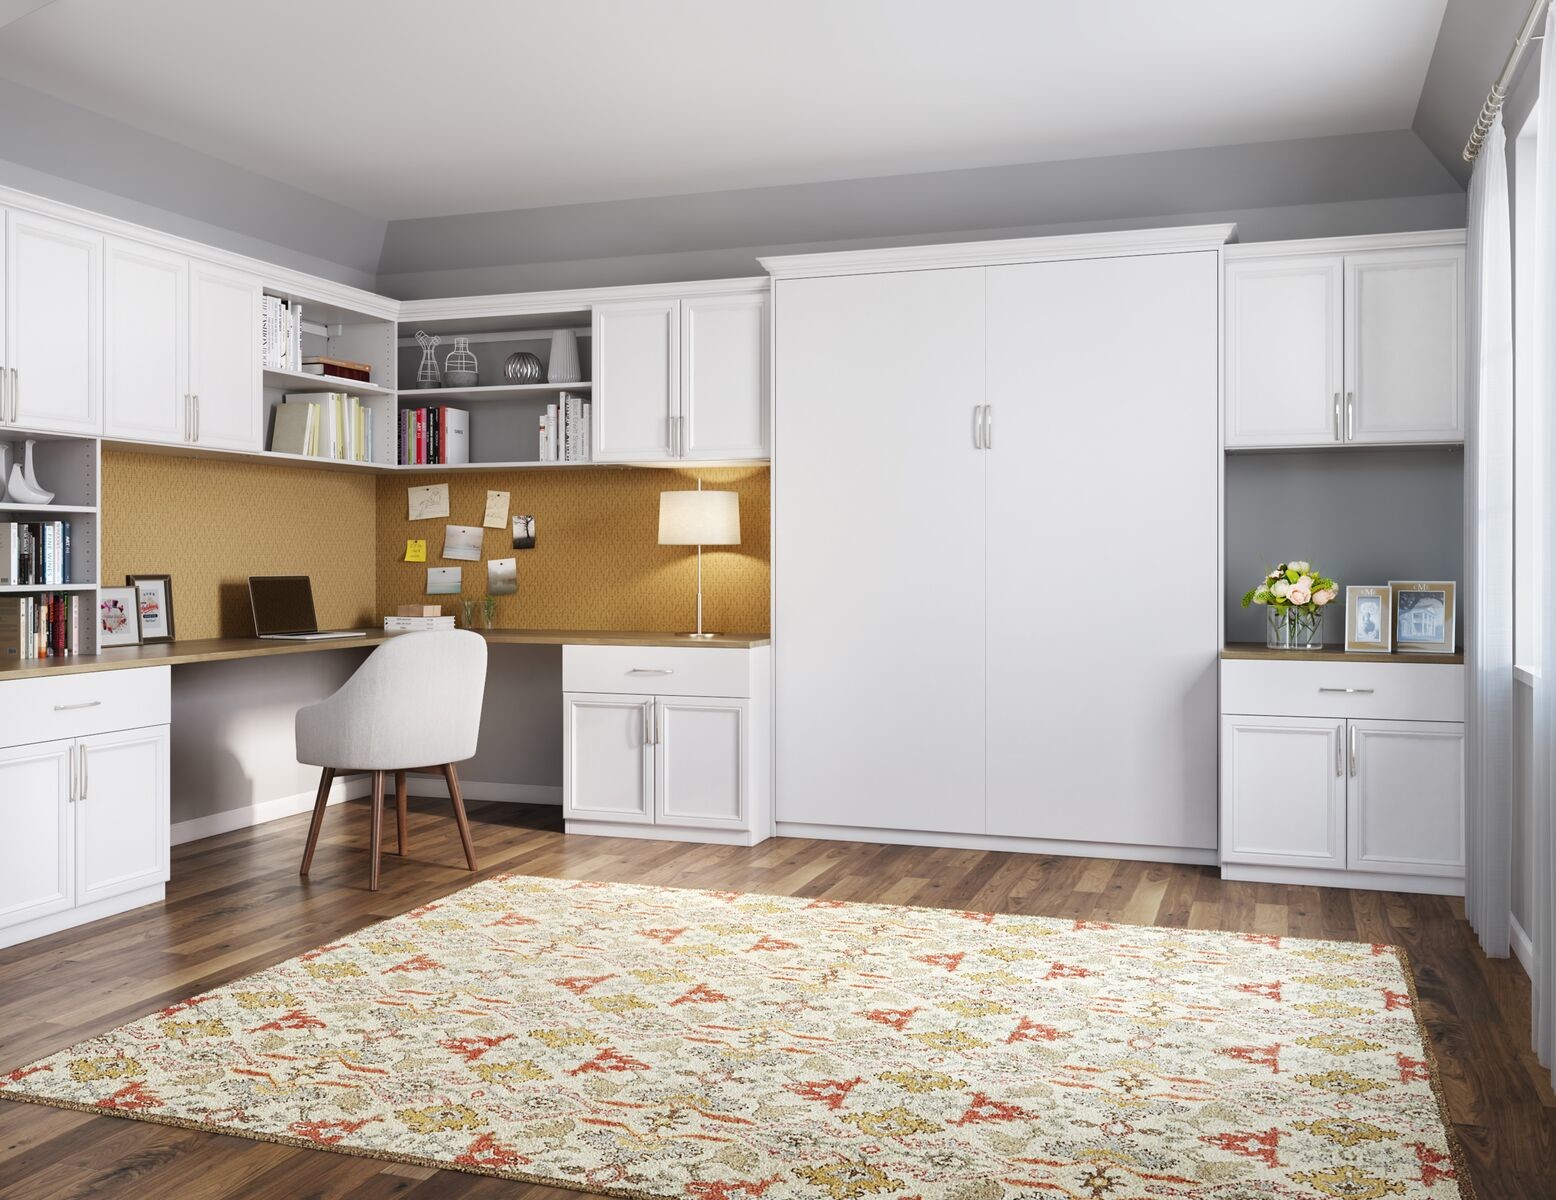 California Closets Stockton - Top 5 Reasons to Invest in a Murphy Bed